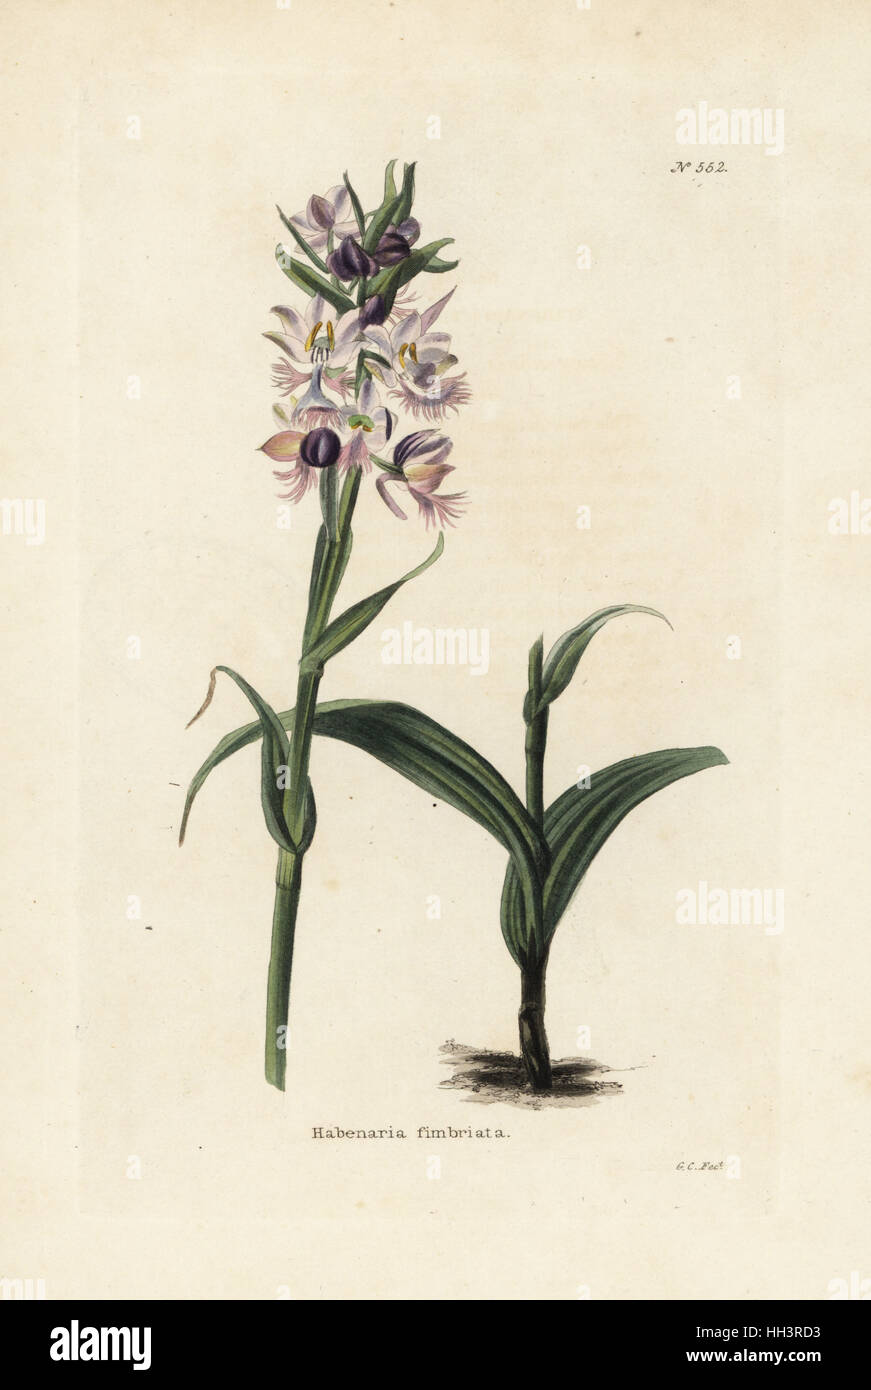 Greater purple fringed orchid, Platanthera grandiflora (Habenaria fimbriata). Handcoloured copperplate engraving by George Cooke from Conrad Loddiges' Botanical Cabinet, Hackney, London, 1821. Stock Photo